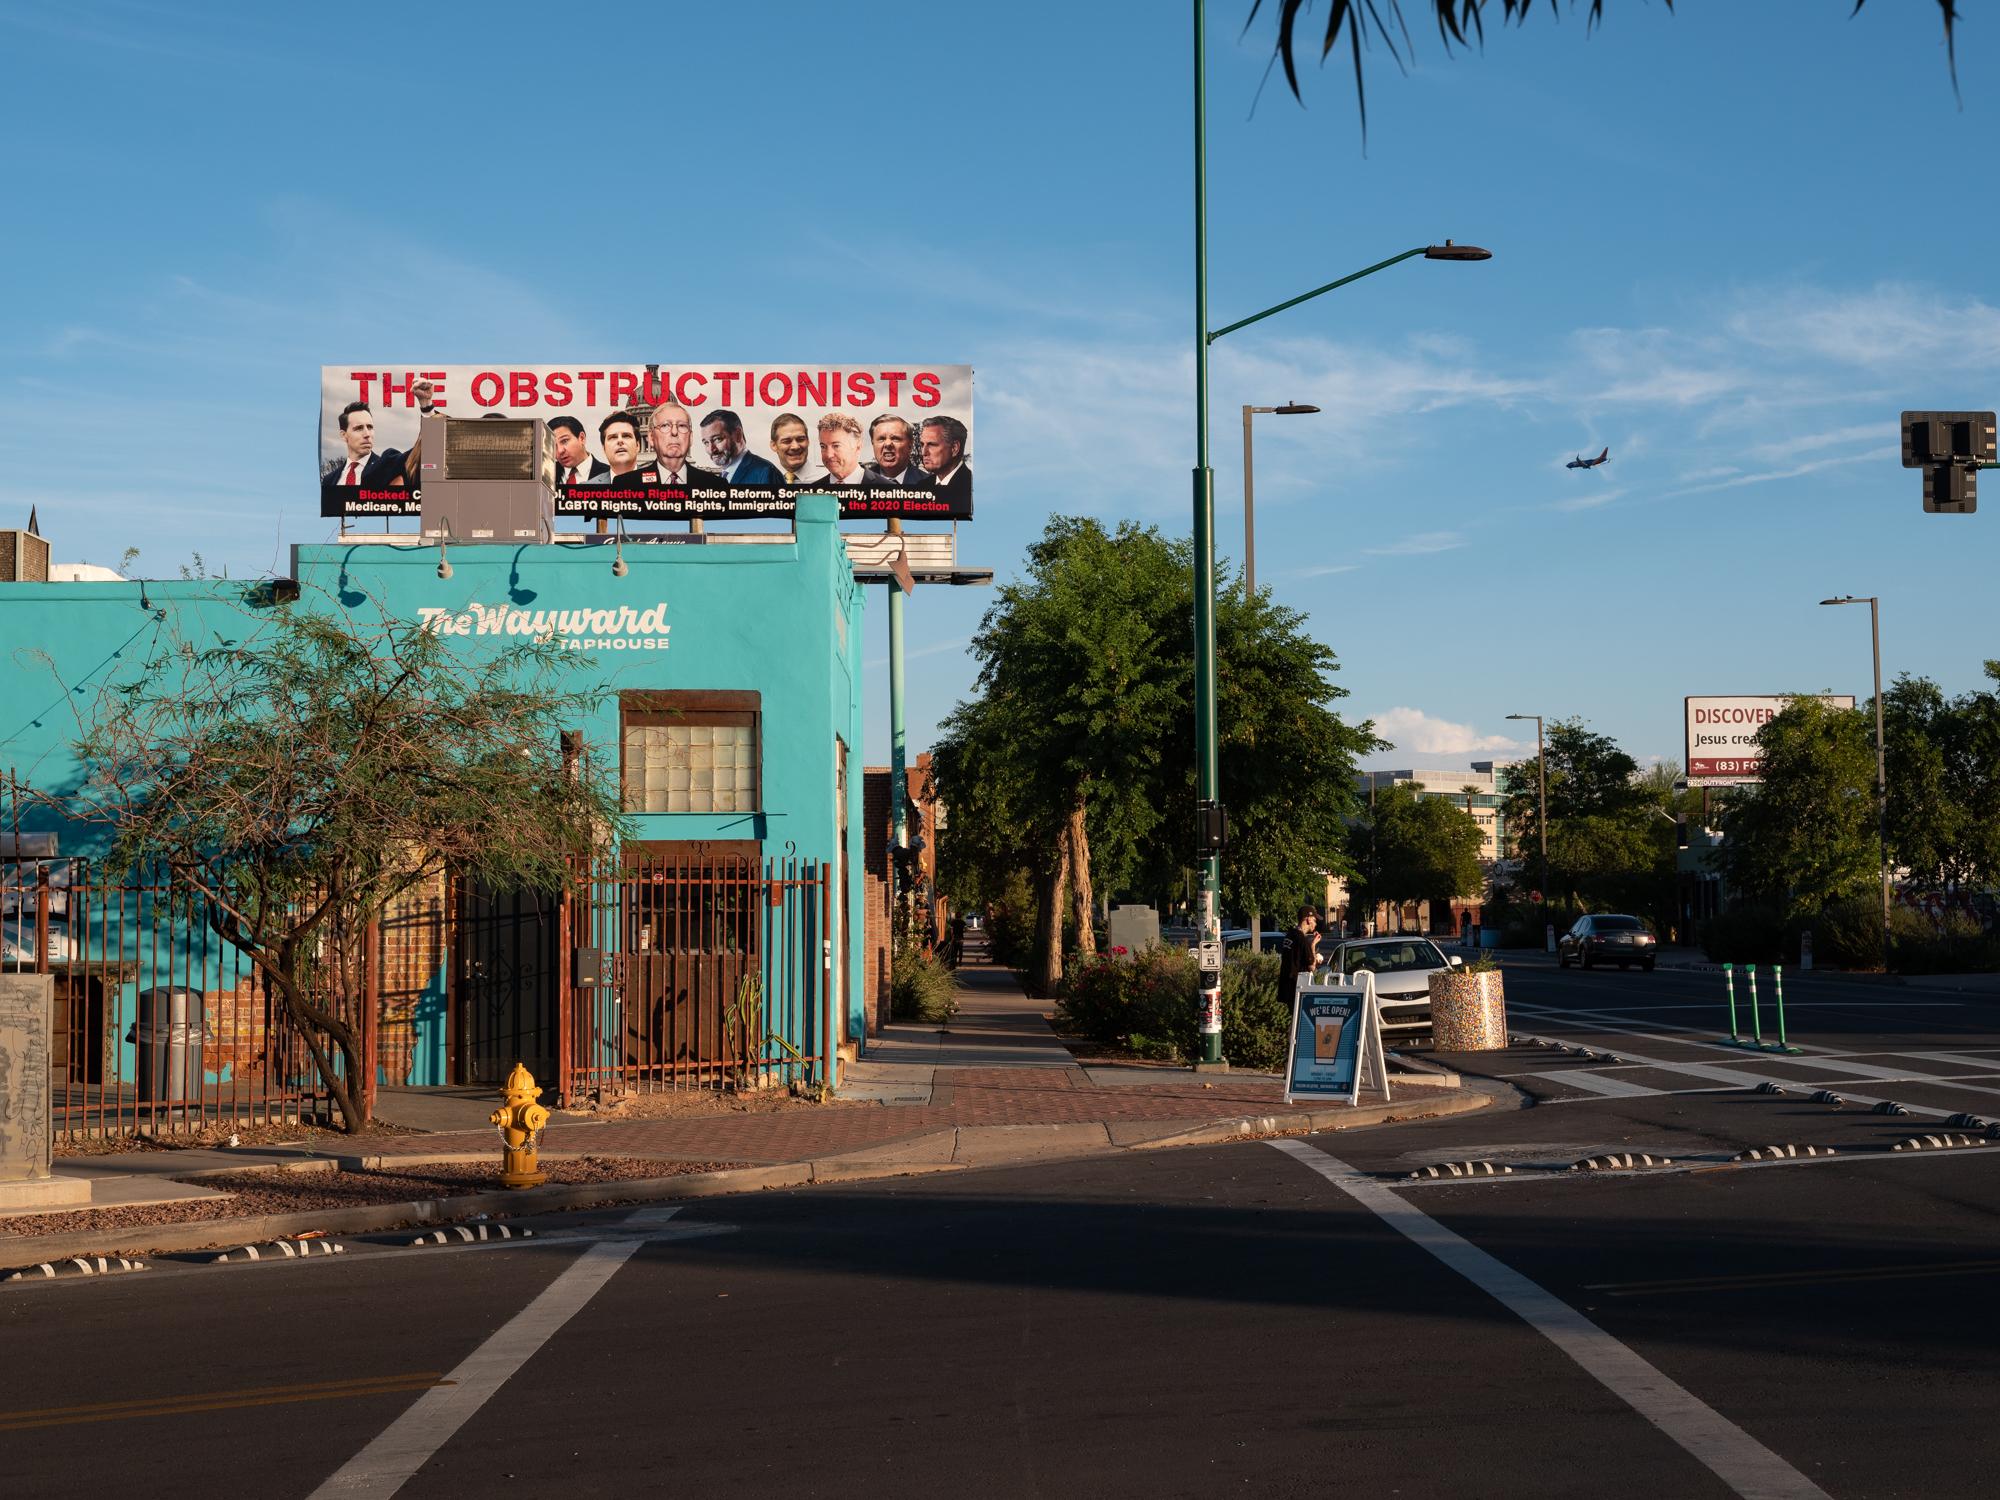 New Arizonans - HuffPost - A billboard depicting radical conservative members of...